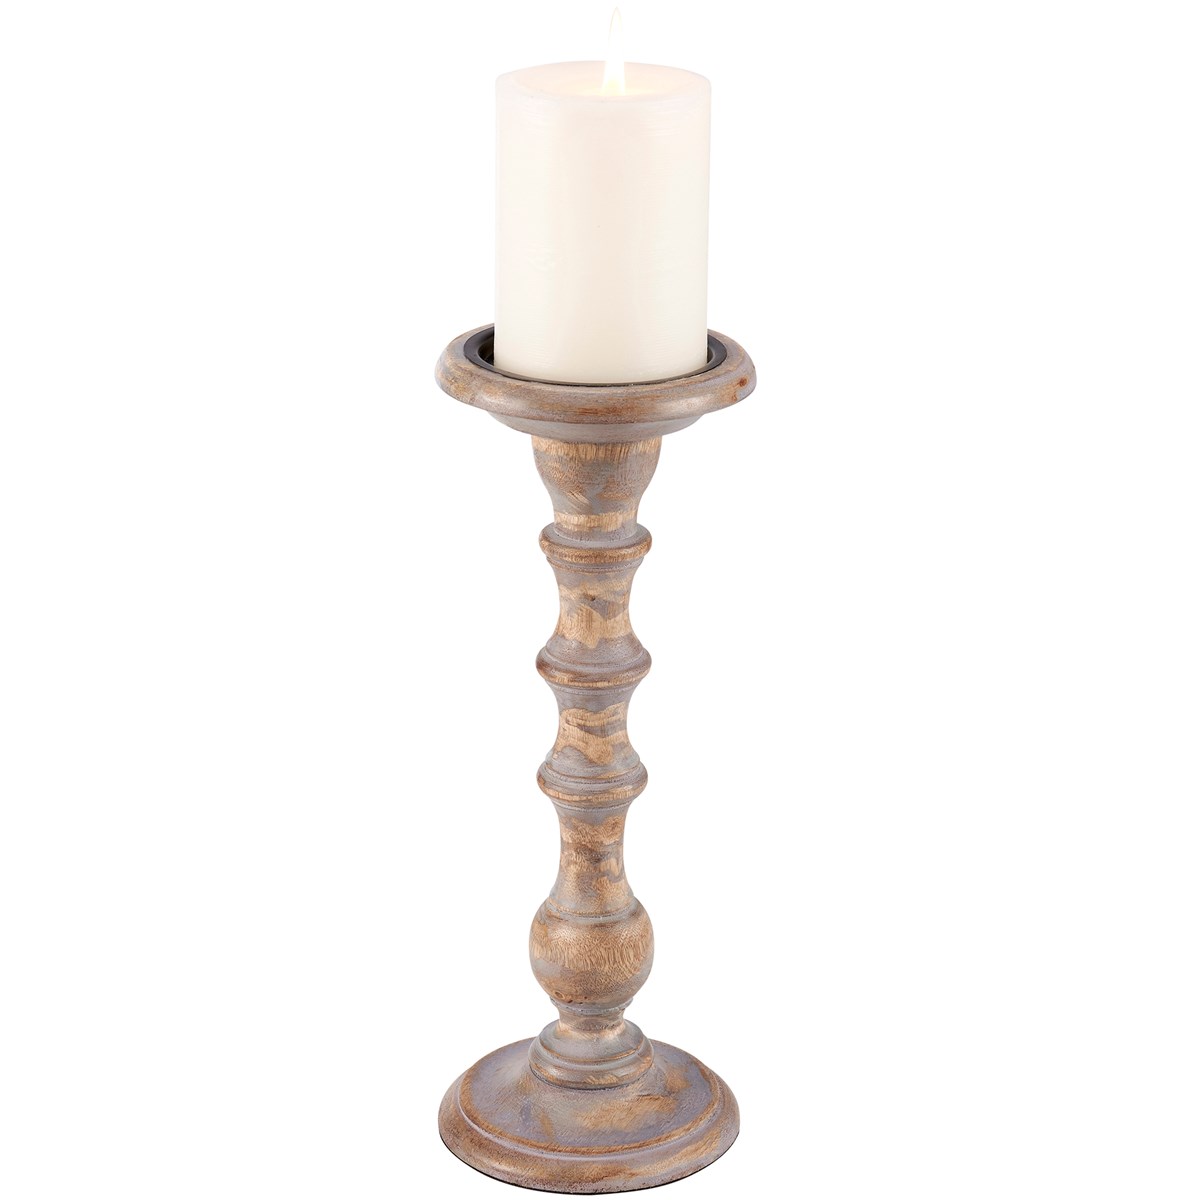 Traditional Candle Holder - Wood